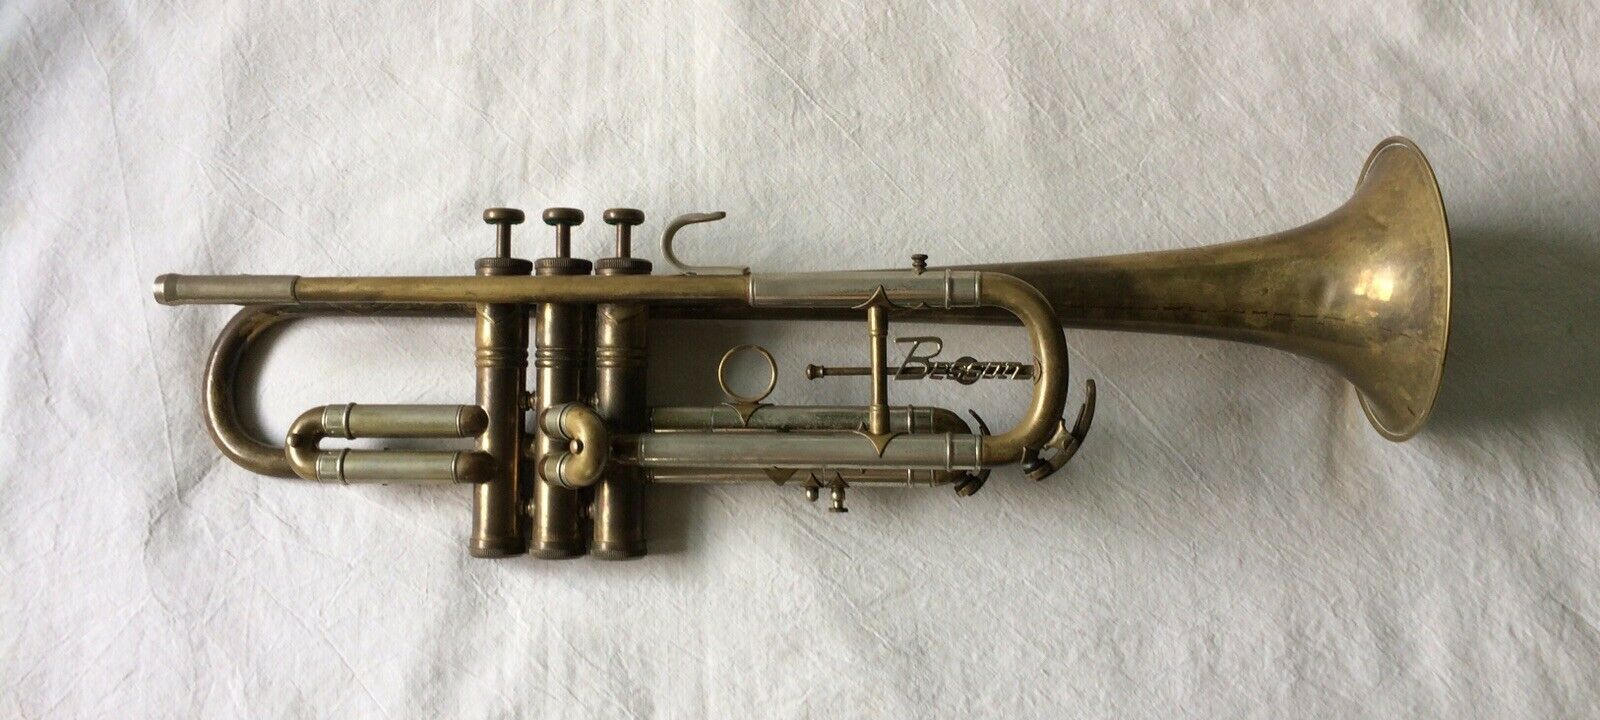 Vintage Besson 8-10 Trumpet Made In England Serial # 381625